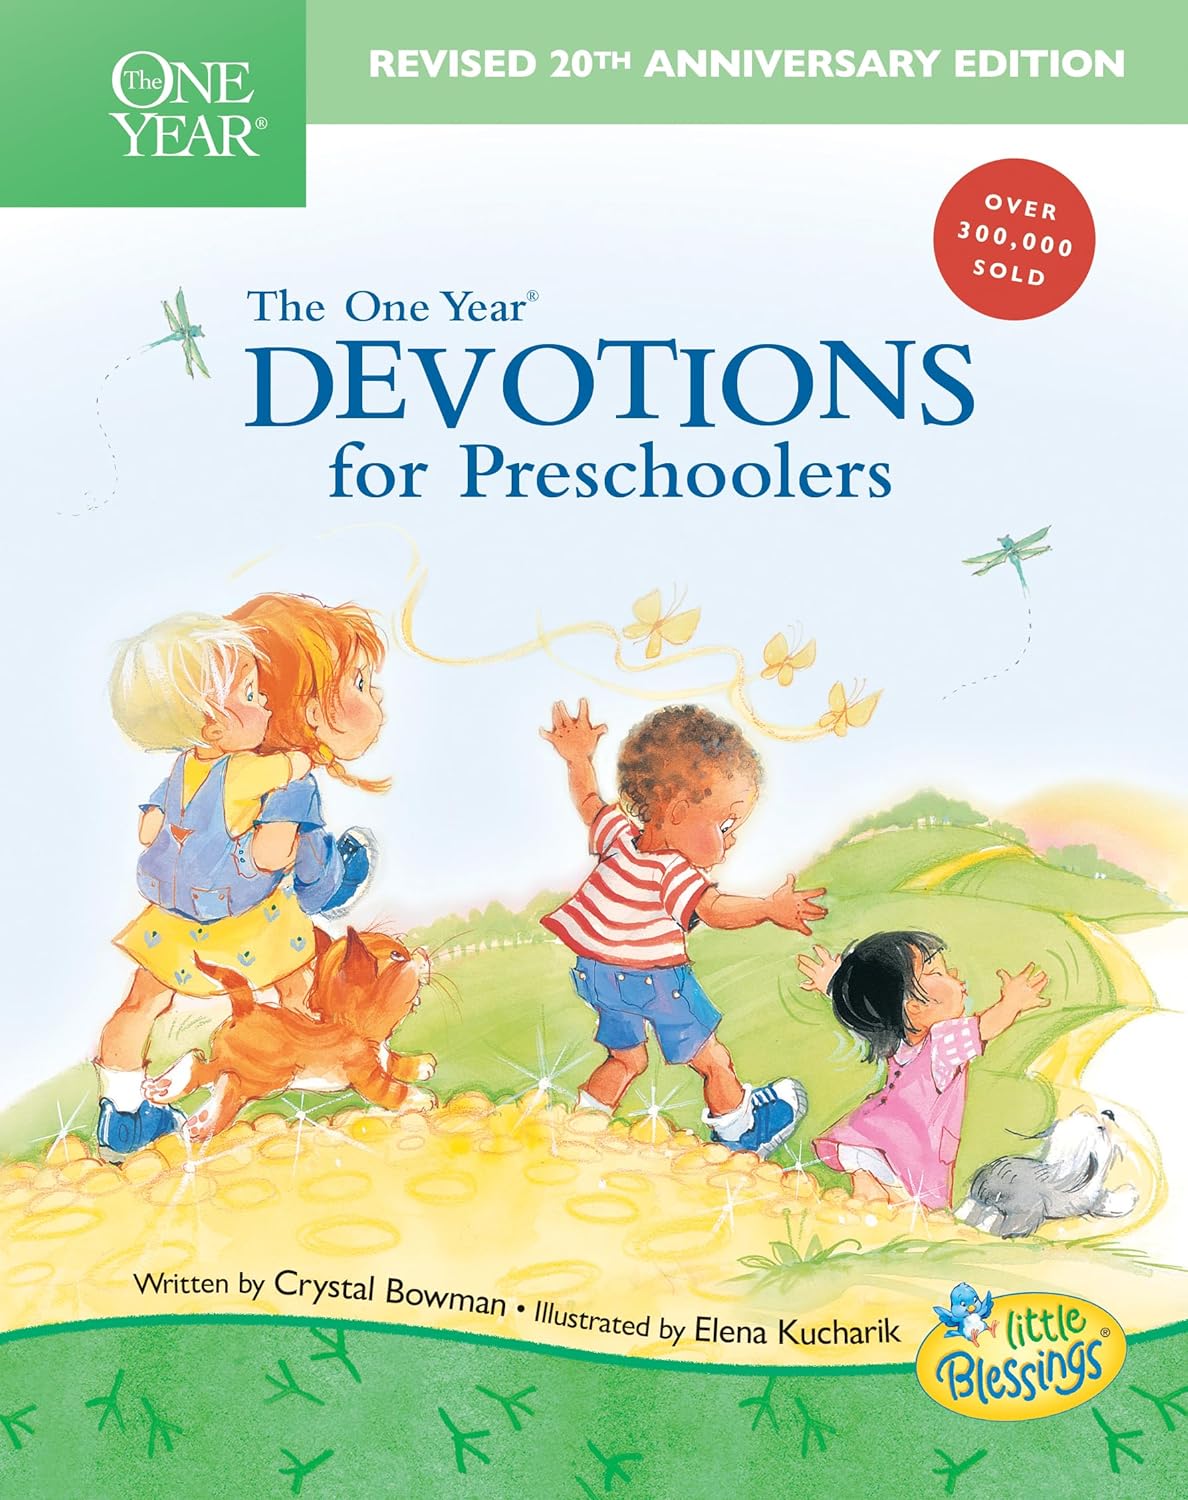 The One Year Devotions for Preschoolers (Little Blessings) Hardcover